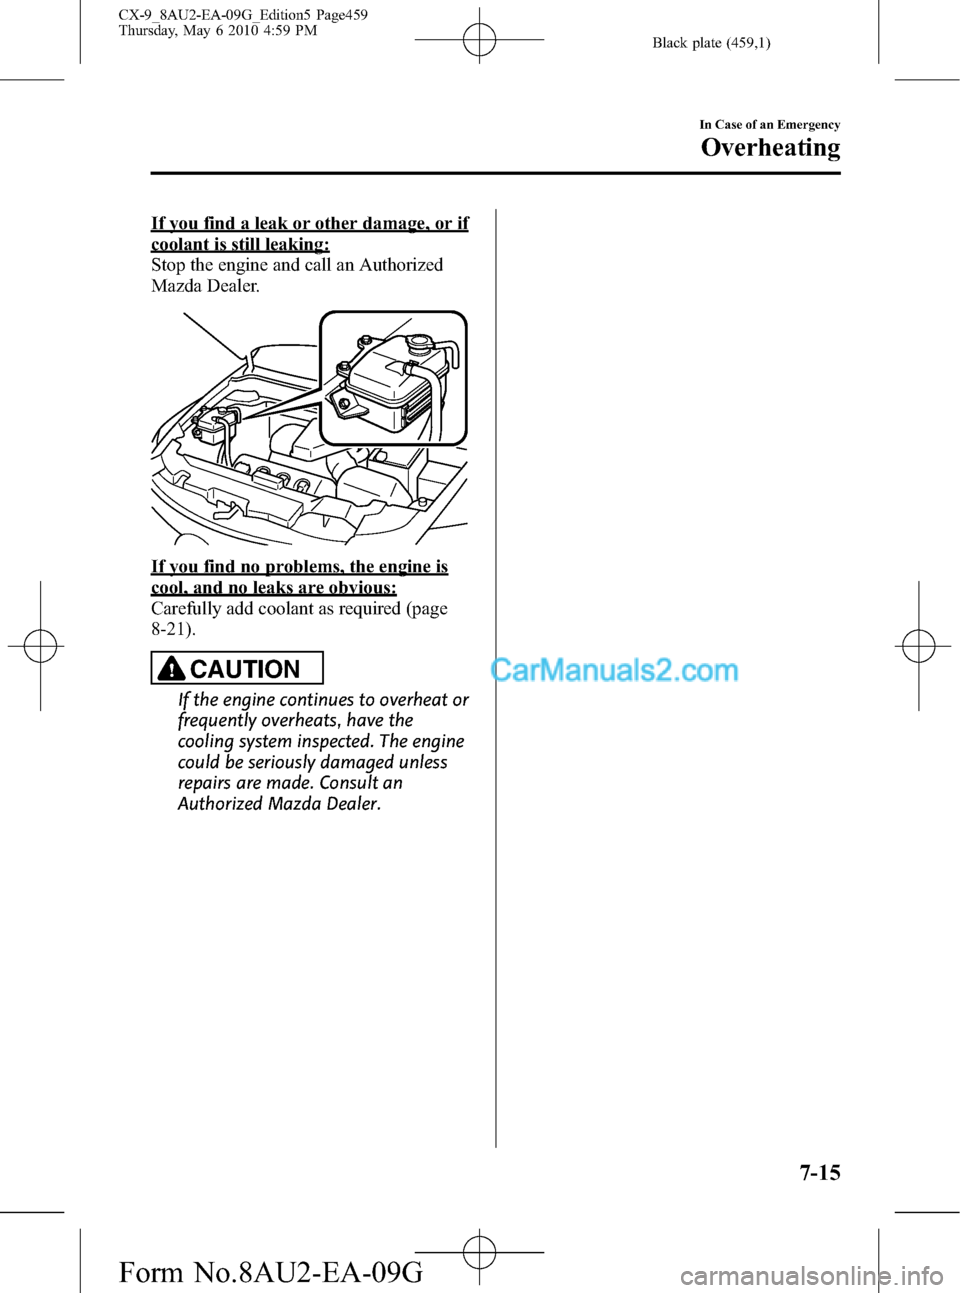 MAZDA MODEL CX-9 2010  Owners Manual (in English) Black plate (459,1)
If you find a leak or other damage, or if
coolant is still leaking:
Stop the engine and call an Authorized
Mazda Dealer.
If you find no problems, the engine is
cool, and no leaks a